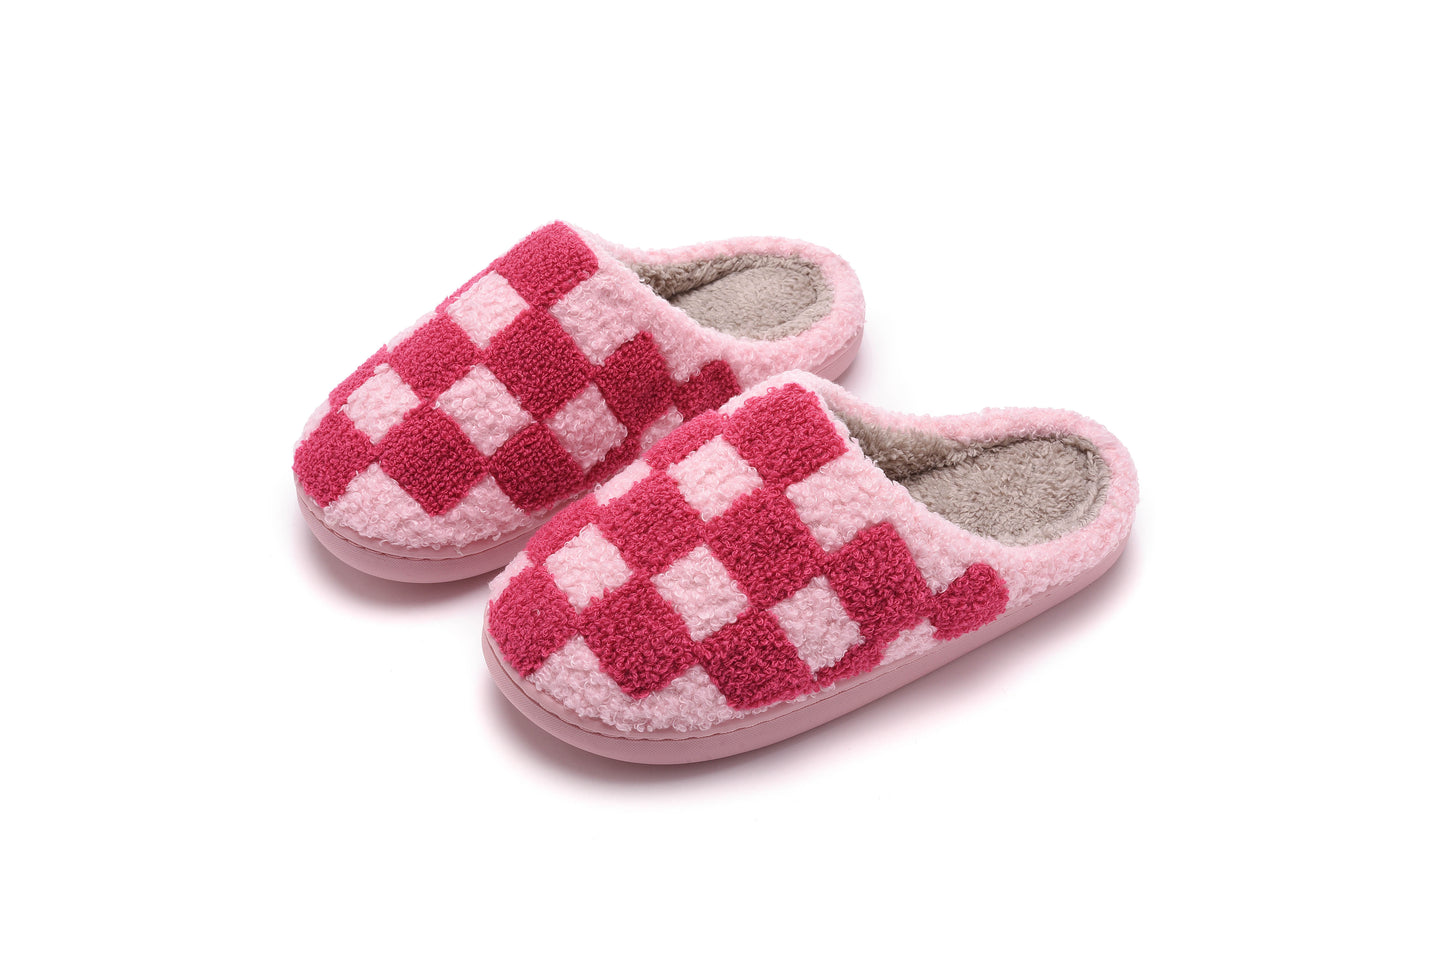 Checkered Pattern Illustrated Comfort Cozy Plush Fluffy Fur Slip On Cushion Slippers